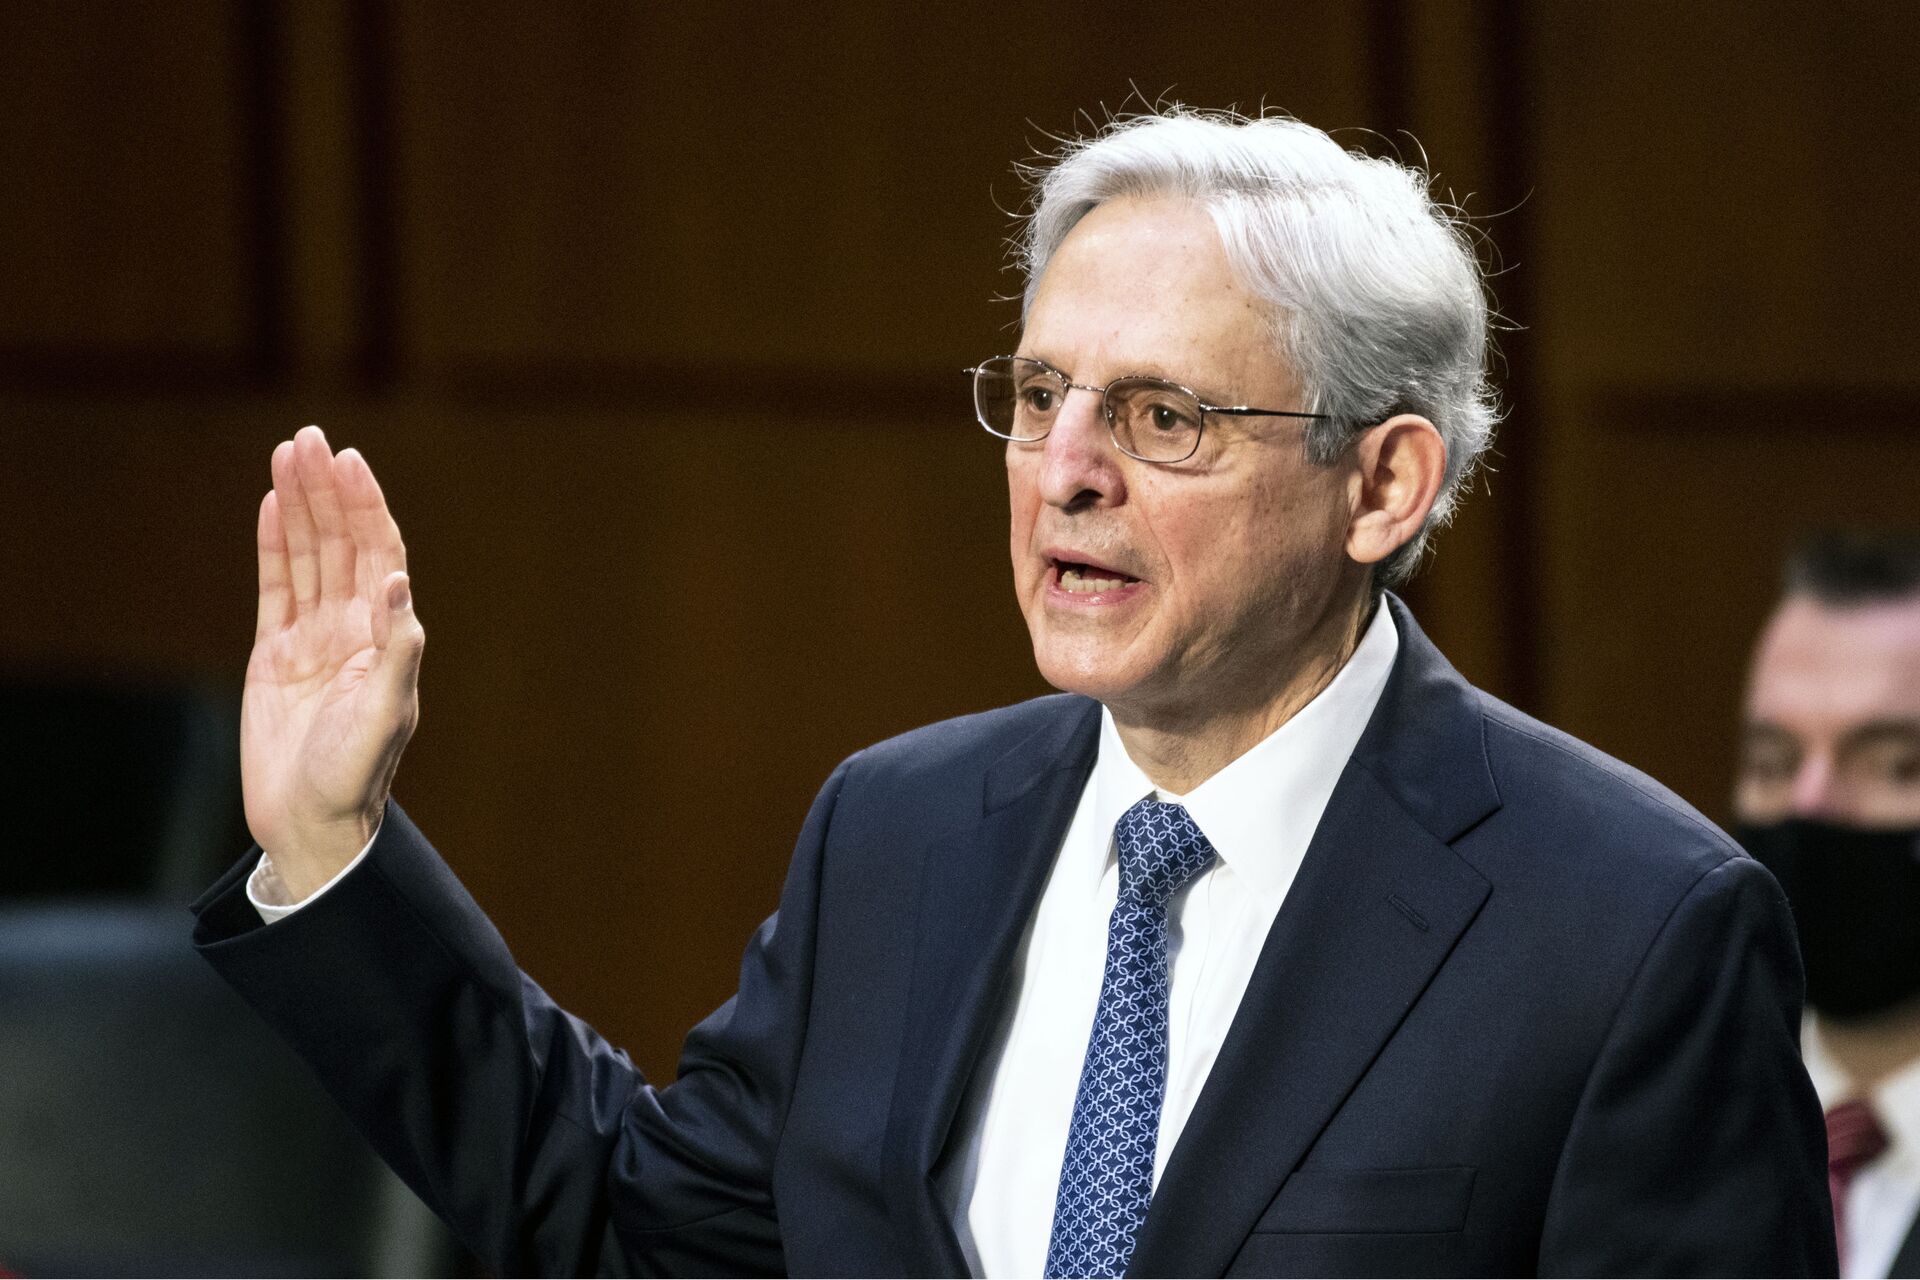 Judge Merrick Garland, nominee to be Attorney General, is sworn in at his confirmation hearing before the Senate Judiciary Committee, Monday, Feb. 22, 2021 on Capitol Hill in Washington. (Bill Clark/Pool via AP) - Sputnik International, 1920, 07.09.2021